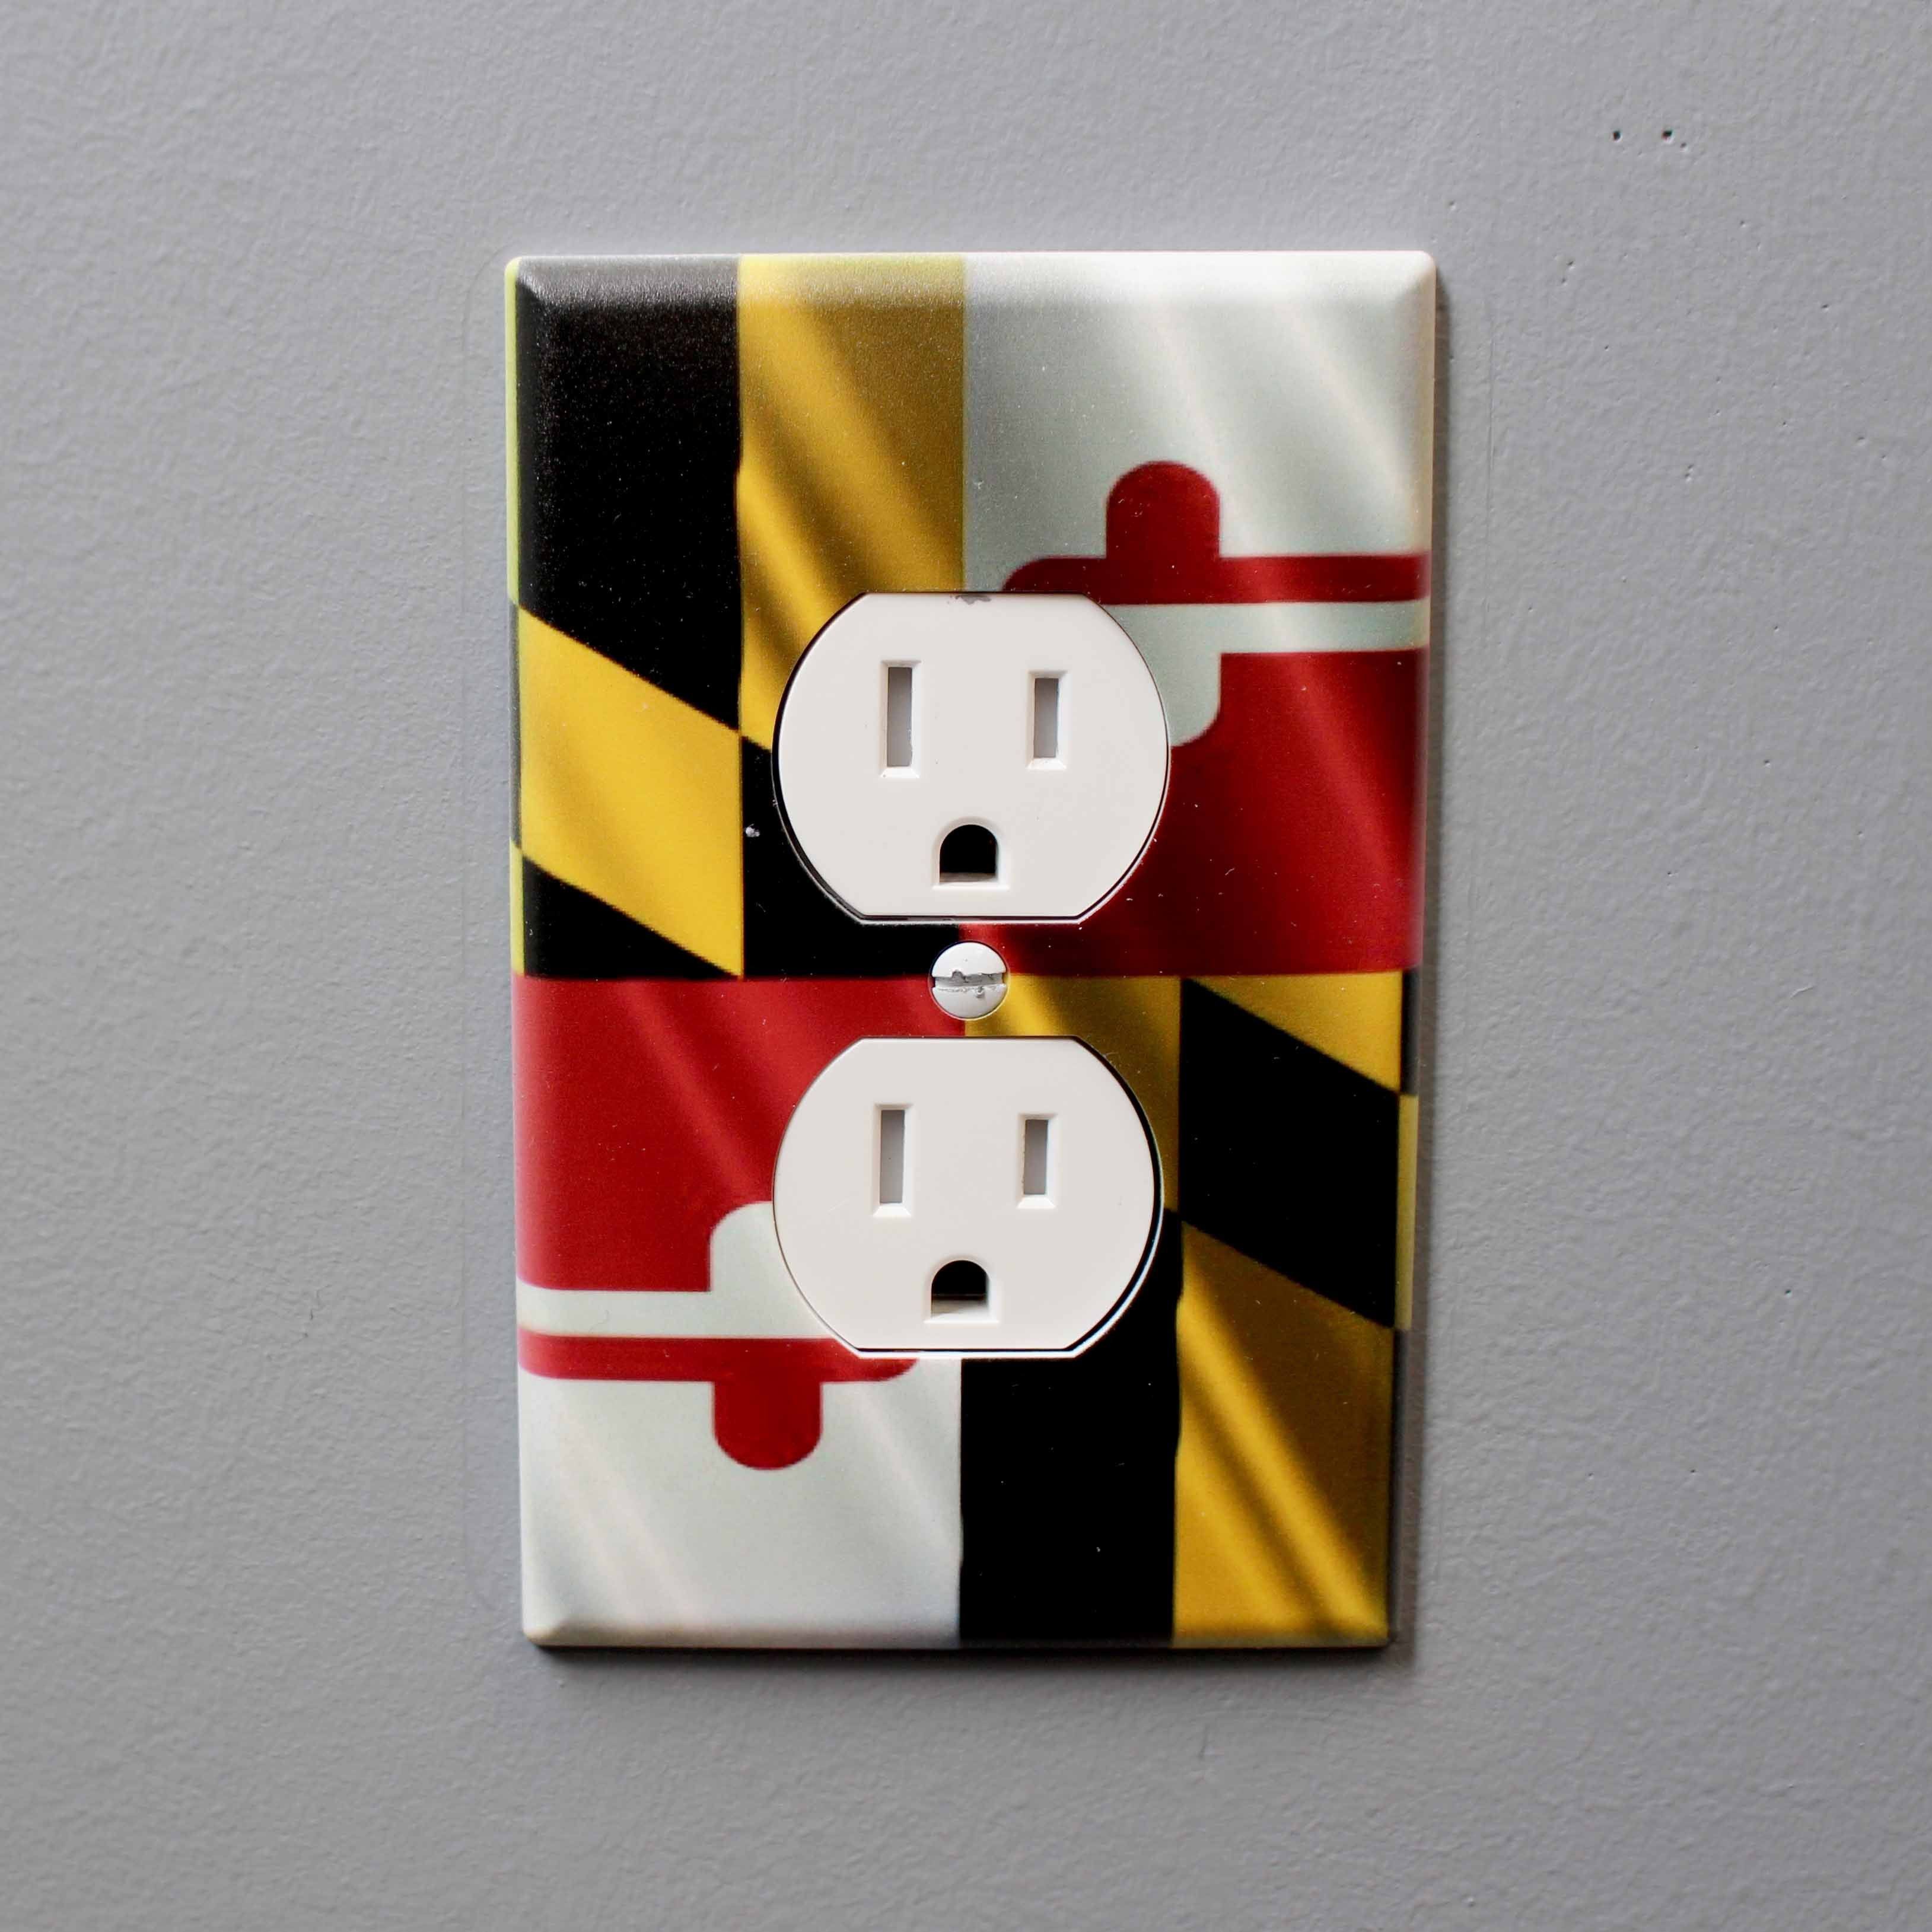 Maryland Flag / Outlet Cover - Route One Apparel